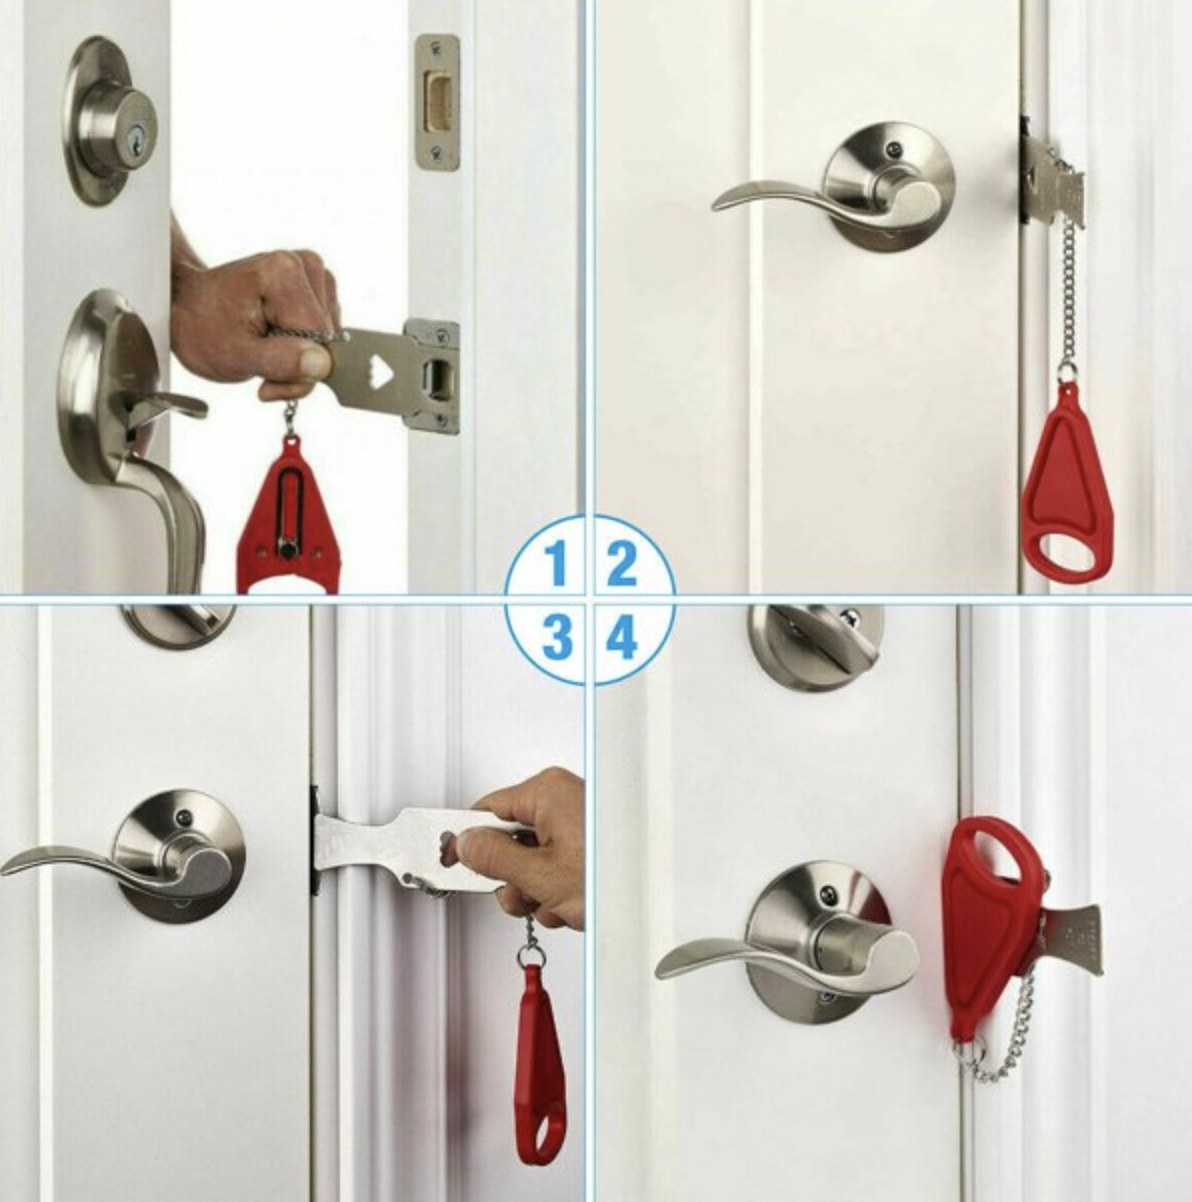 a four way sequence showing the lock in use on the door bolt